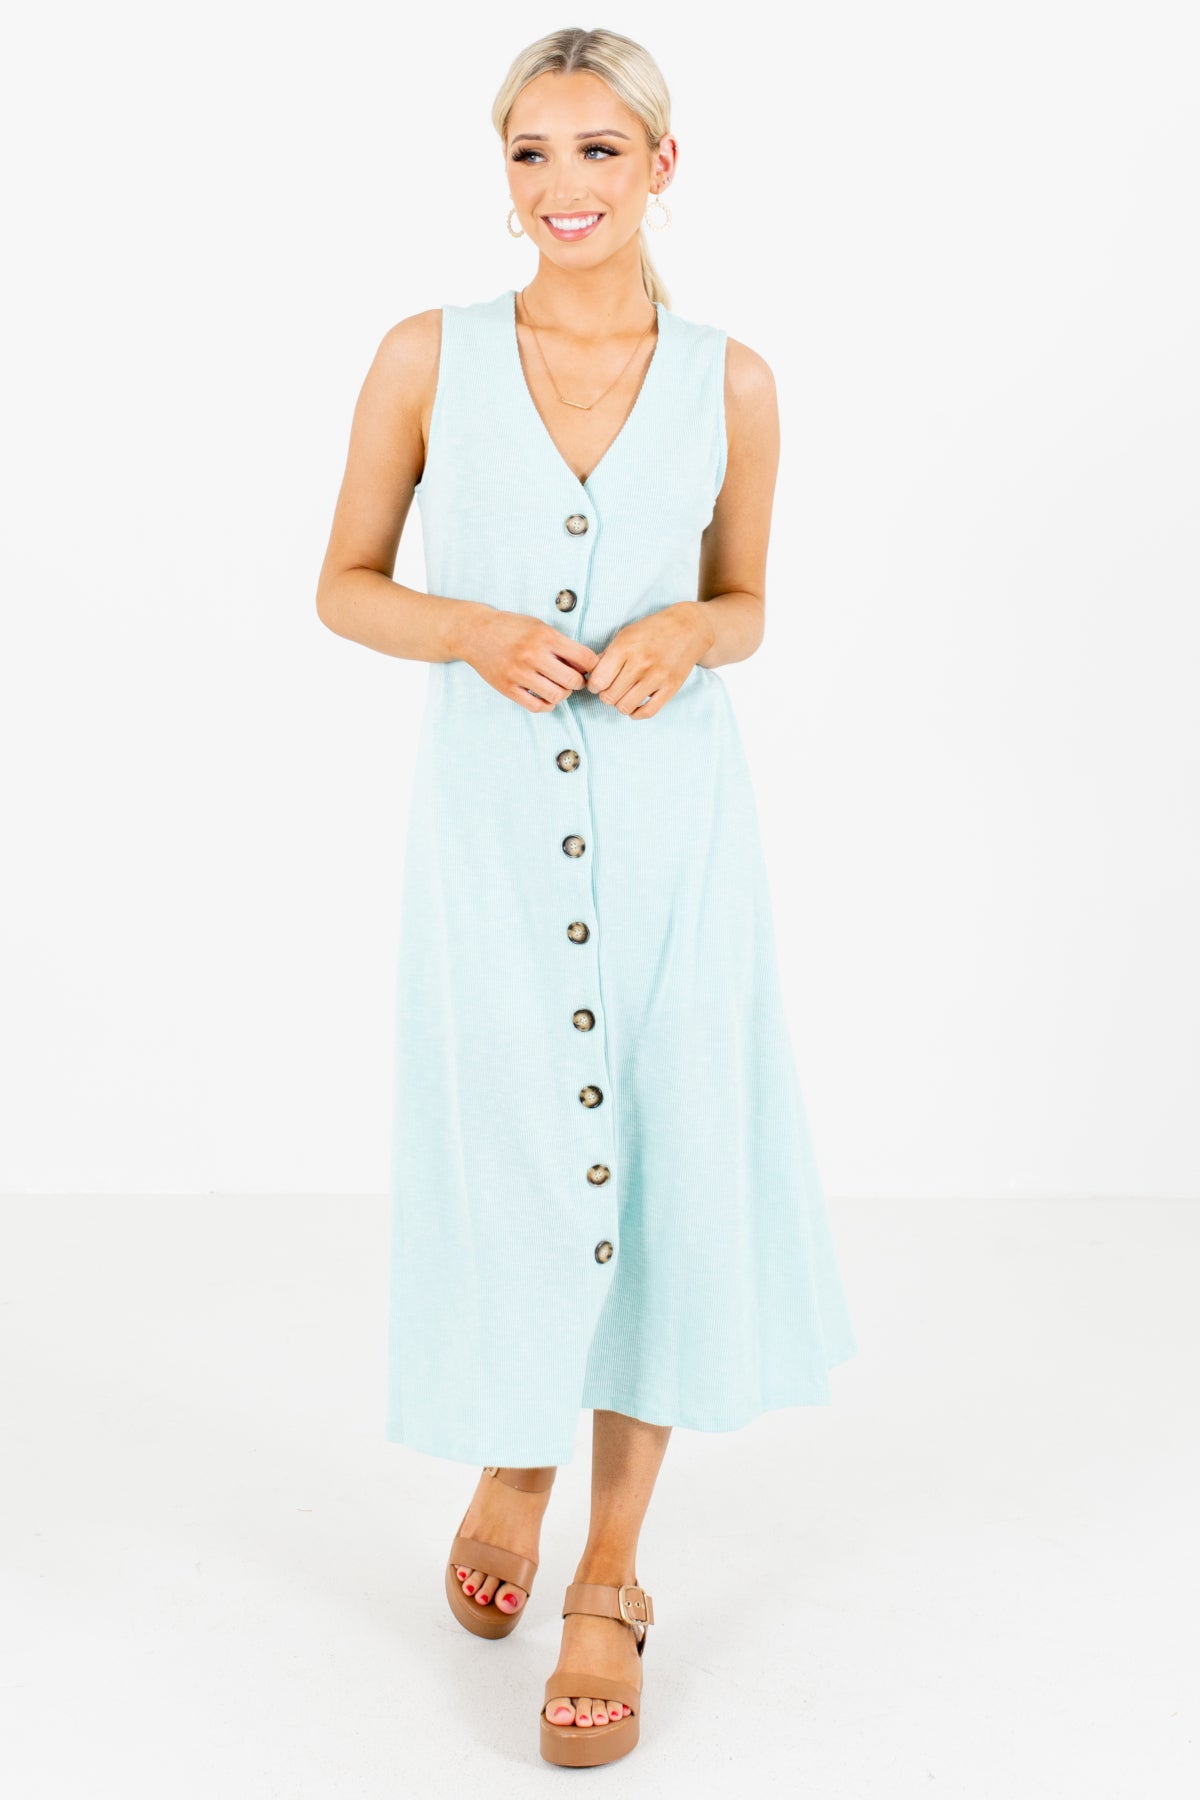 Green Casual Everyday Boutique Midi Dresses for Women